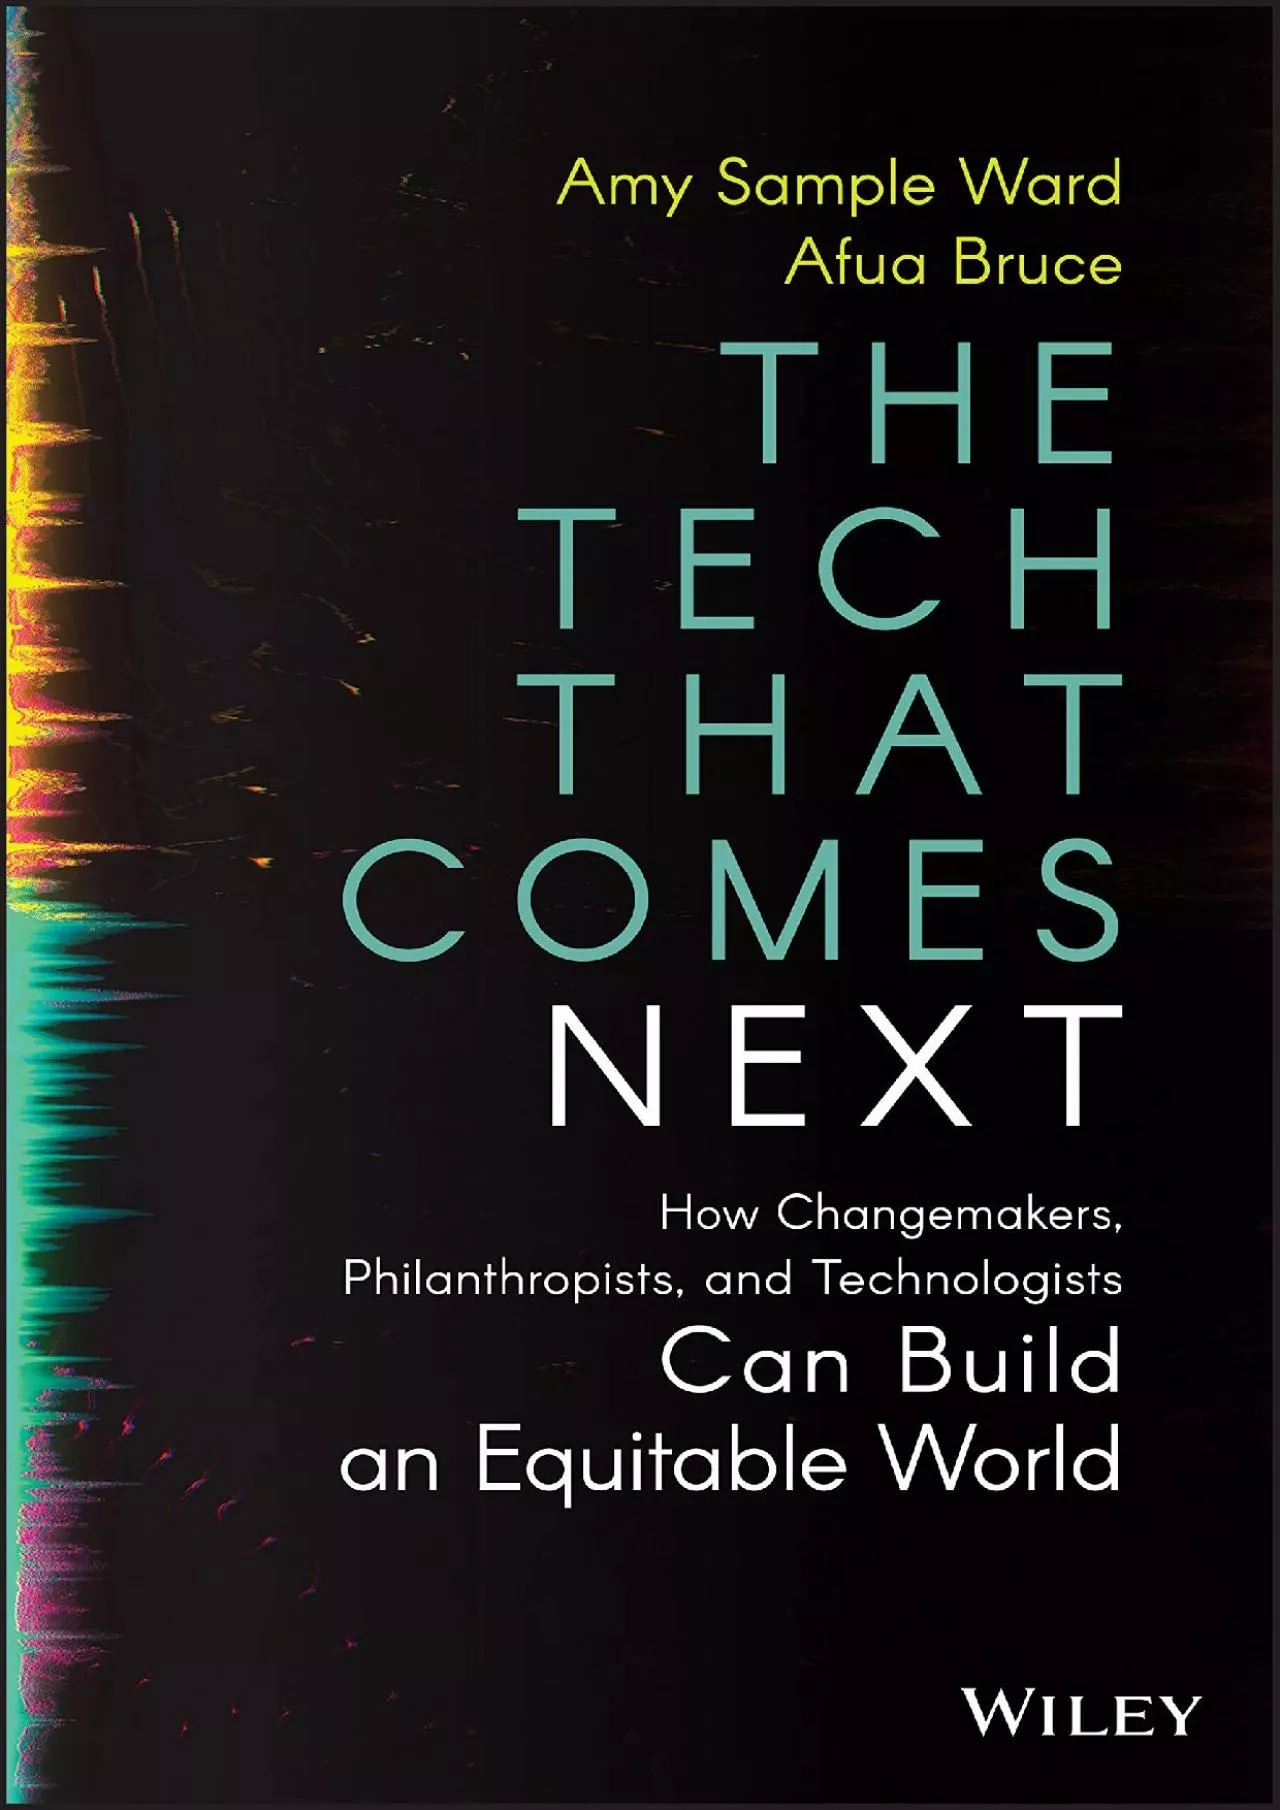 (BOOK)-The Tech That Comes Next: How Changemakers, Philanthropists, and Technologists